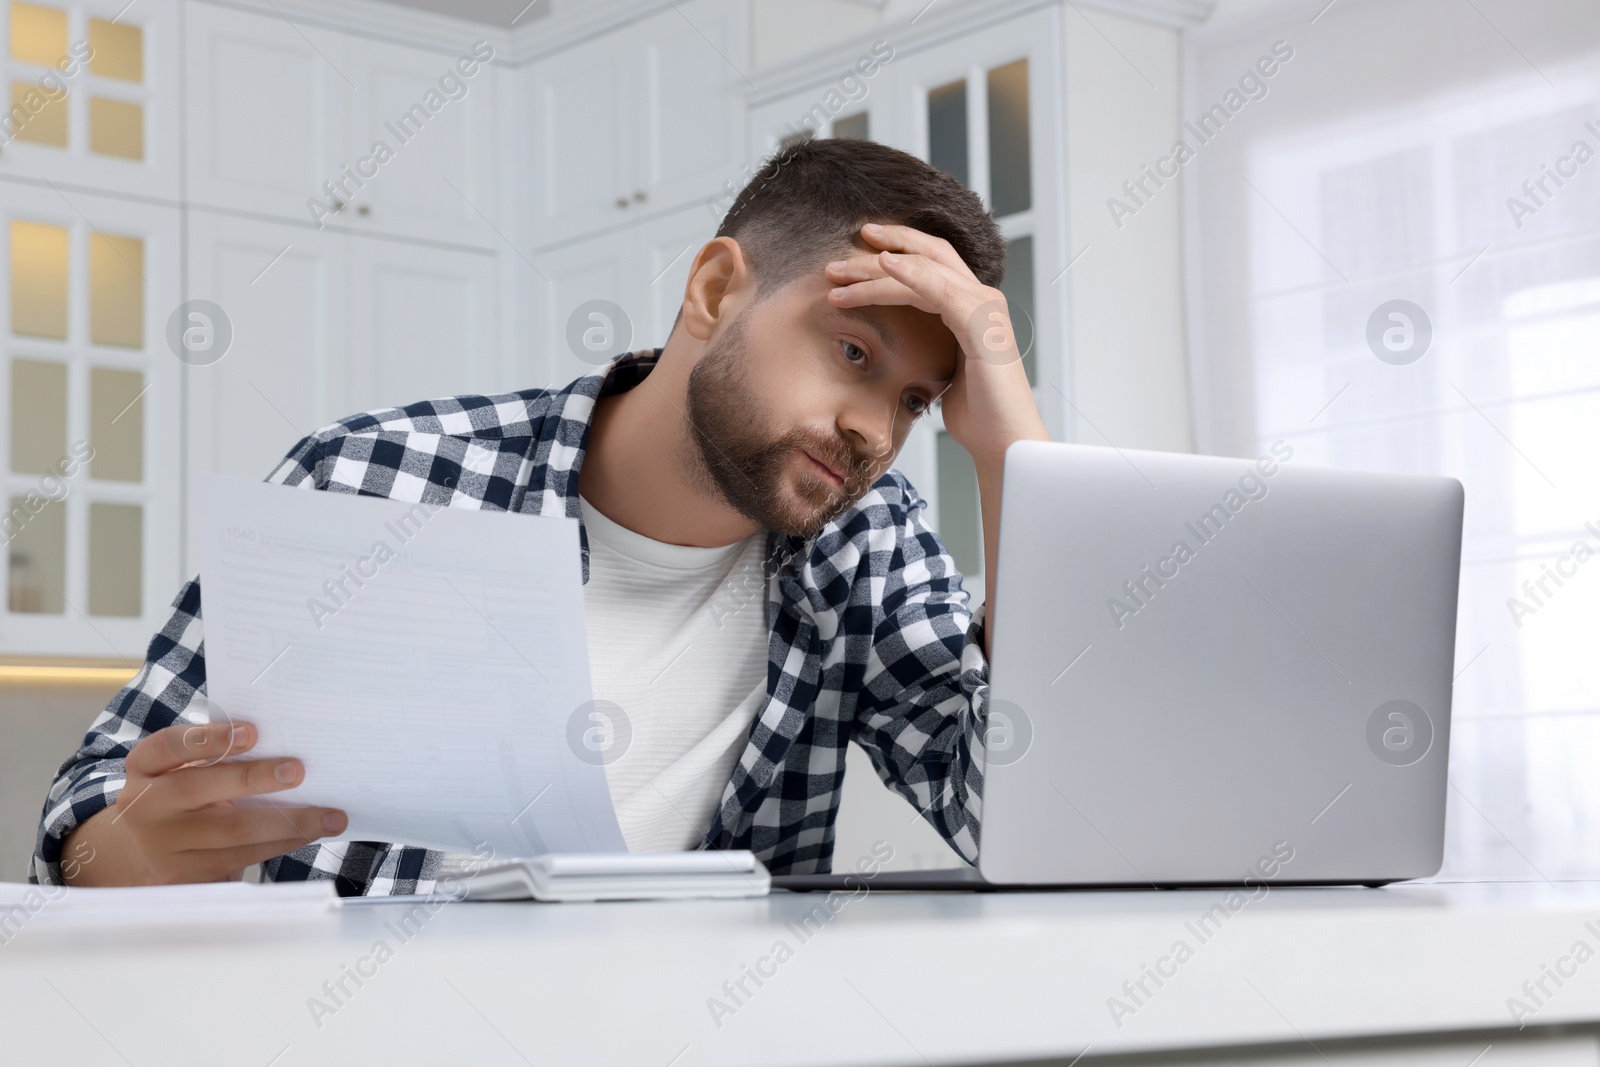 Photo of Man with laptop doing taxes at table in kitchen